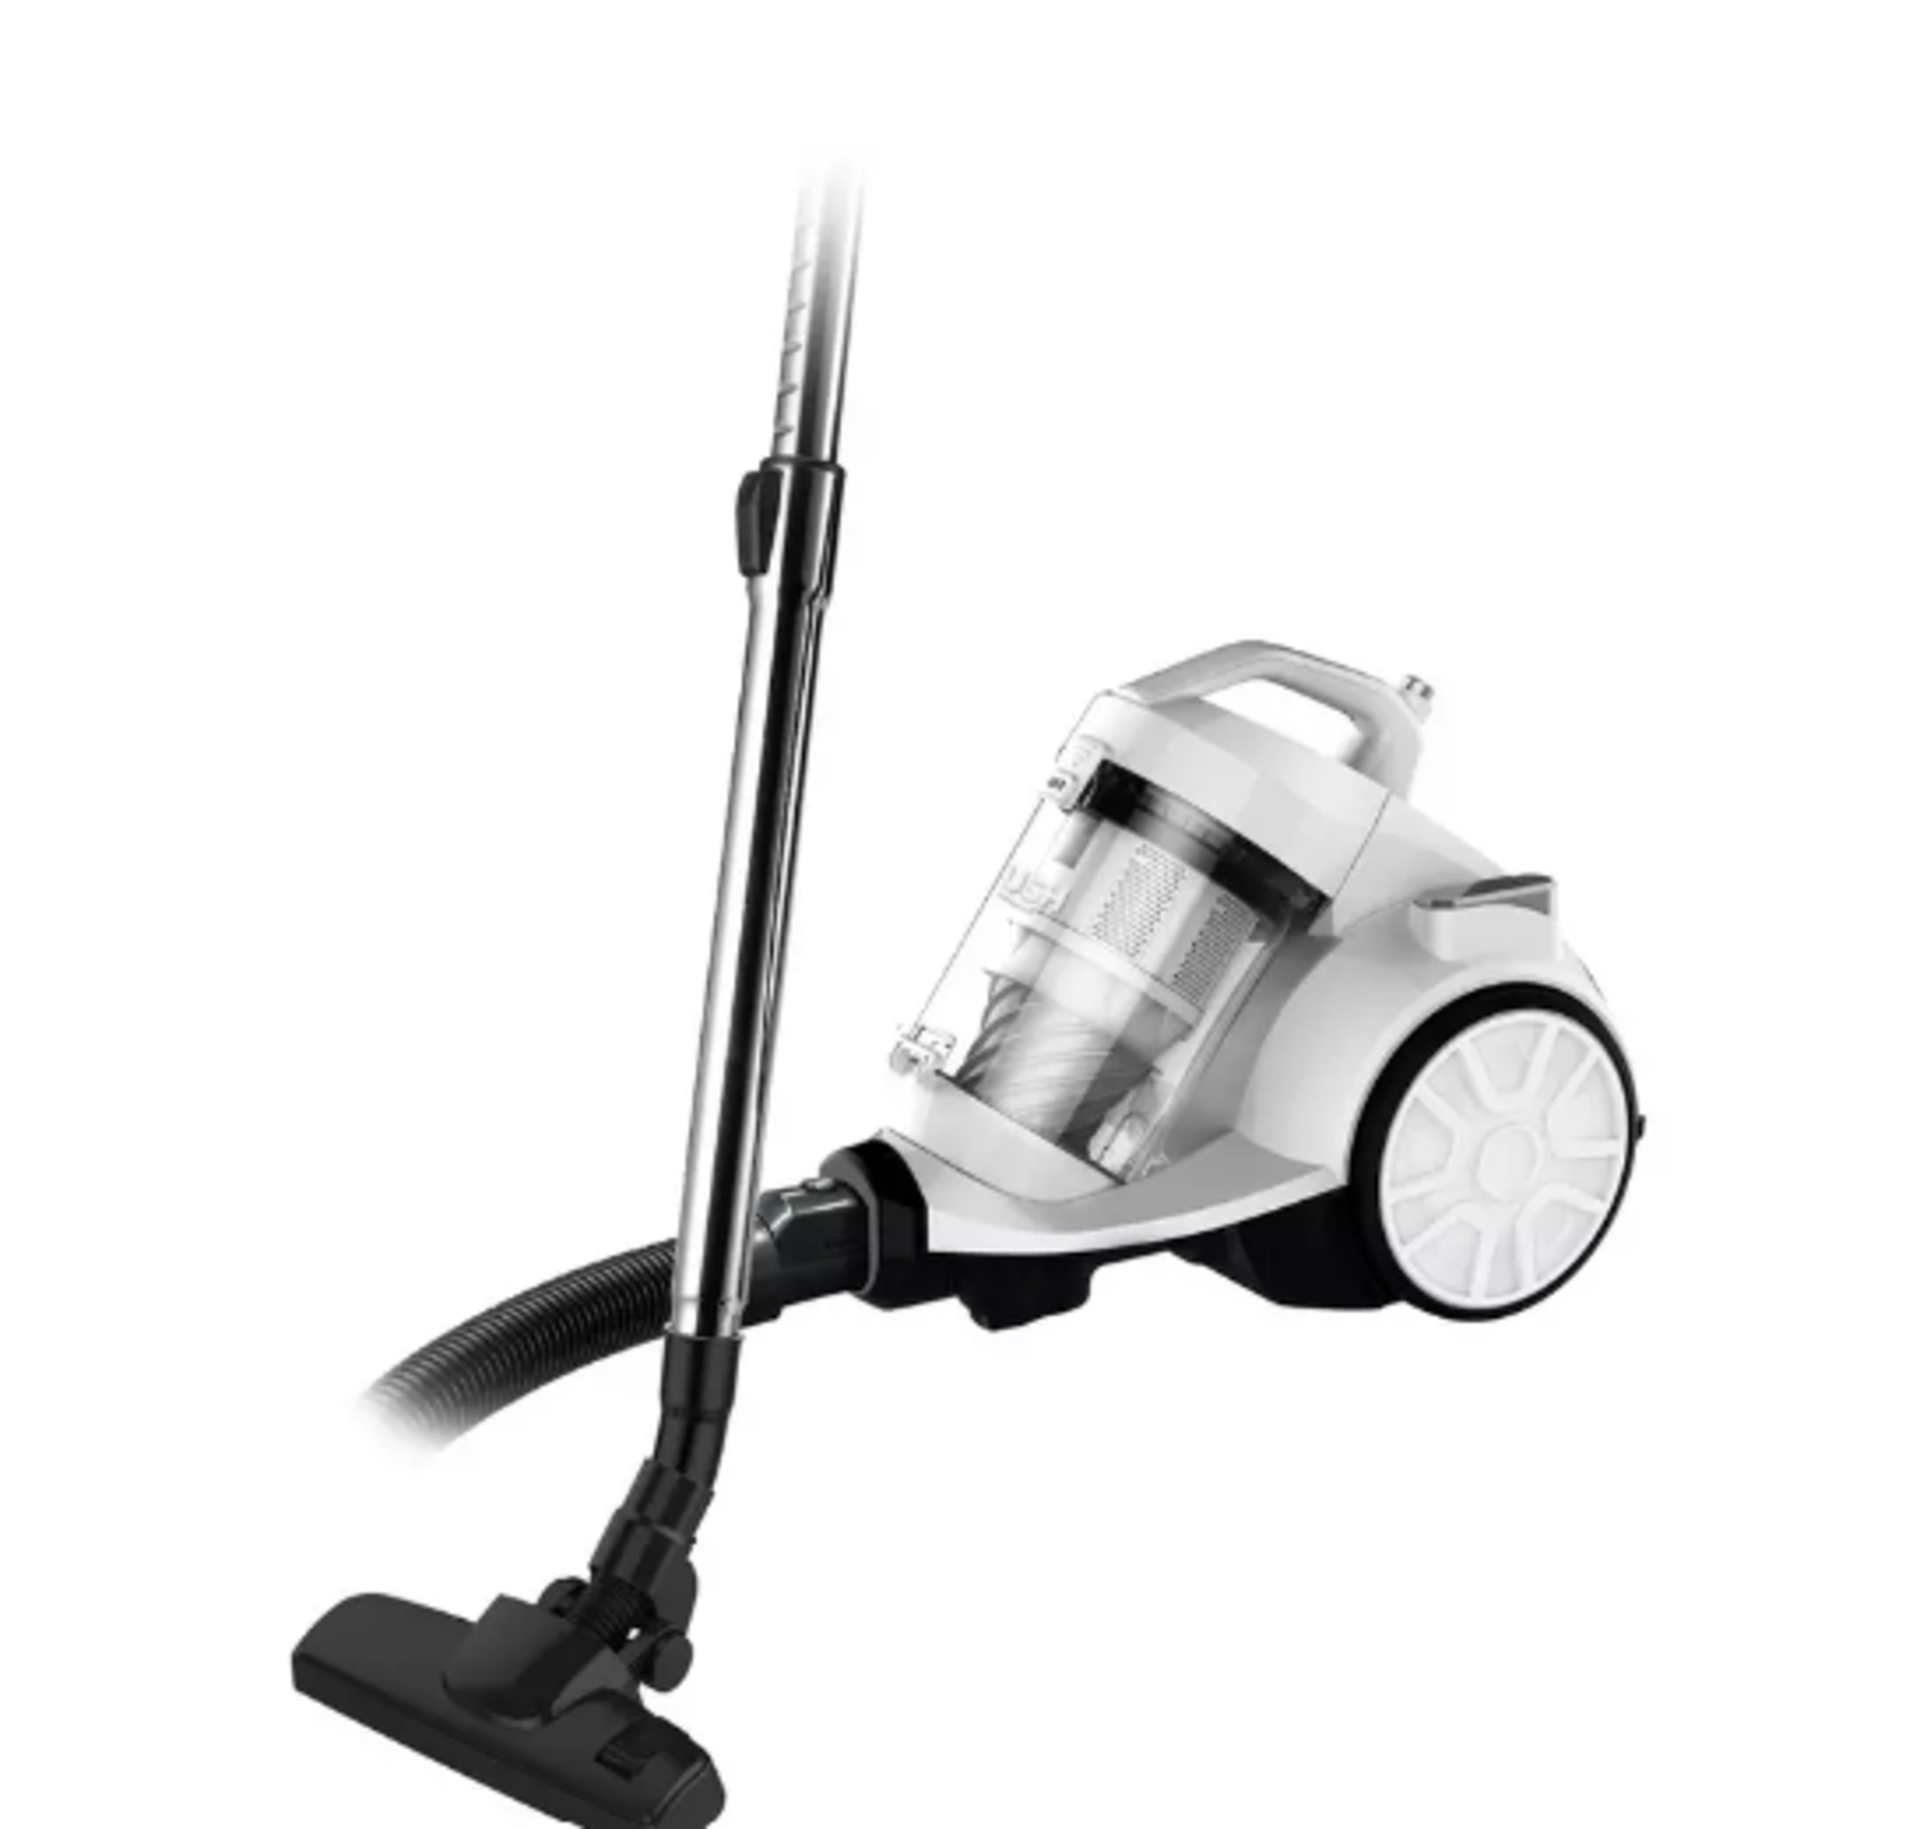 Bush Multi Cyclonic Bagless Cylinder Vacuum Cleaner. RRP £105.00. - EBR. *BOXED* Deal with dust